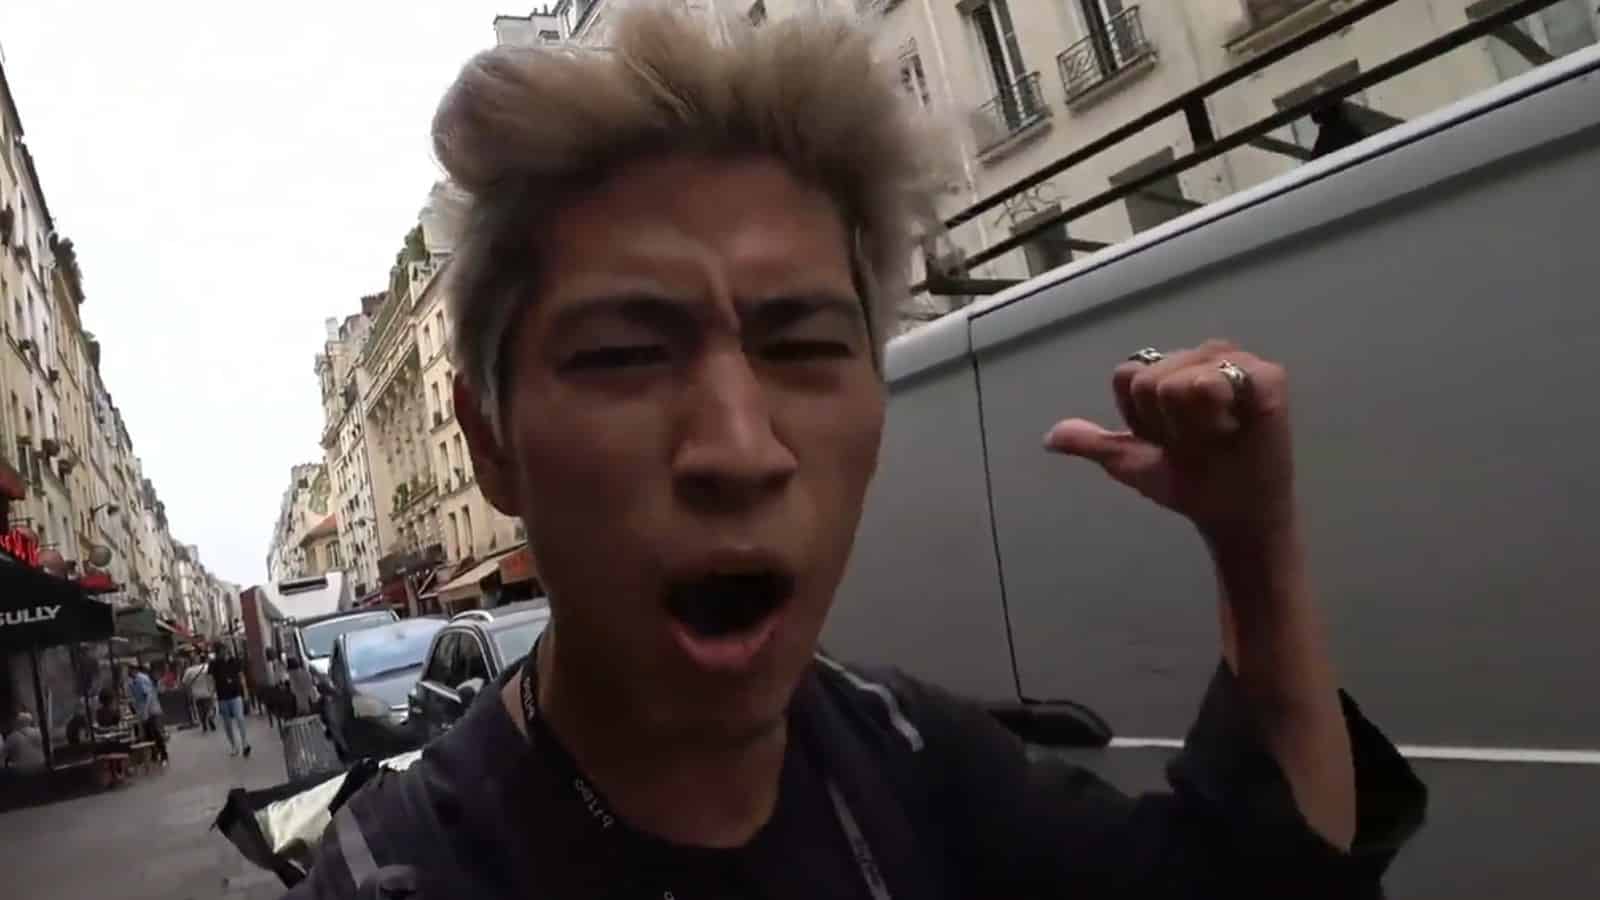 IRL Twitch streamer JOEYKAOTYK yells to camera about racist bystander